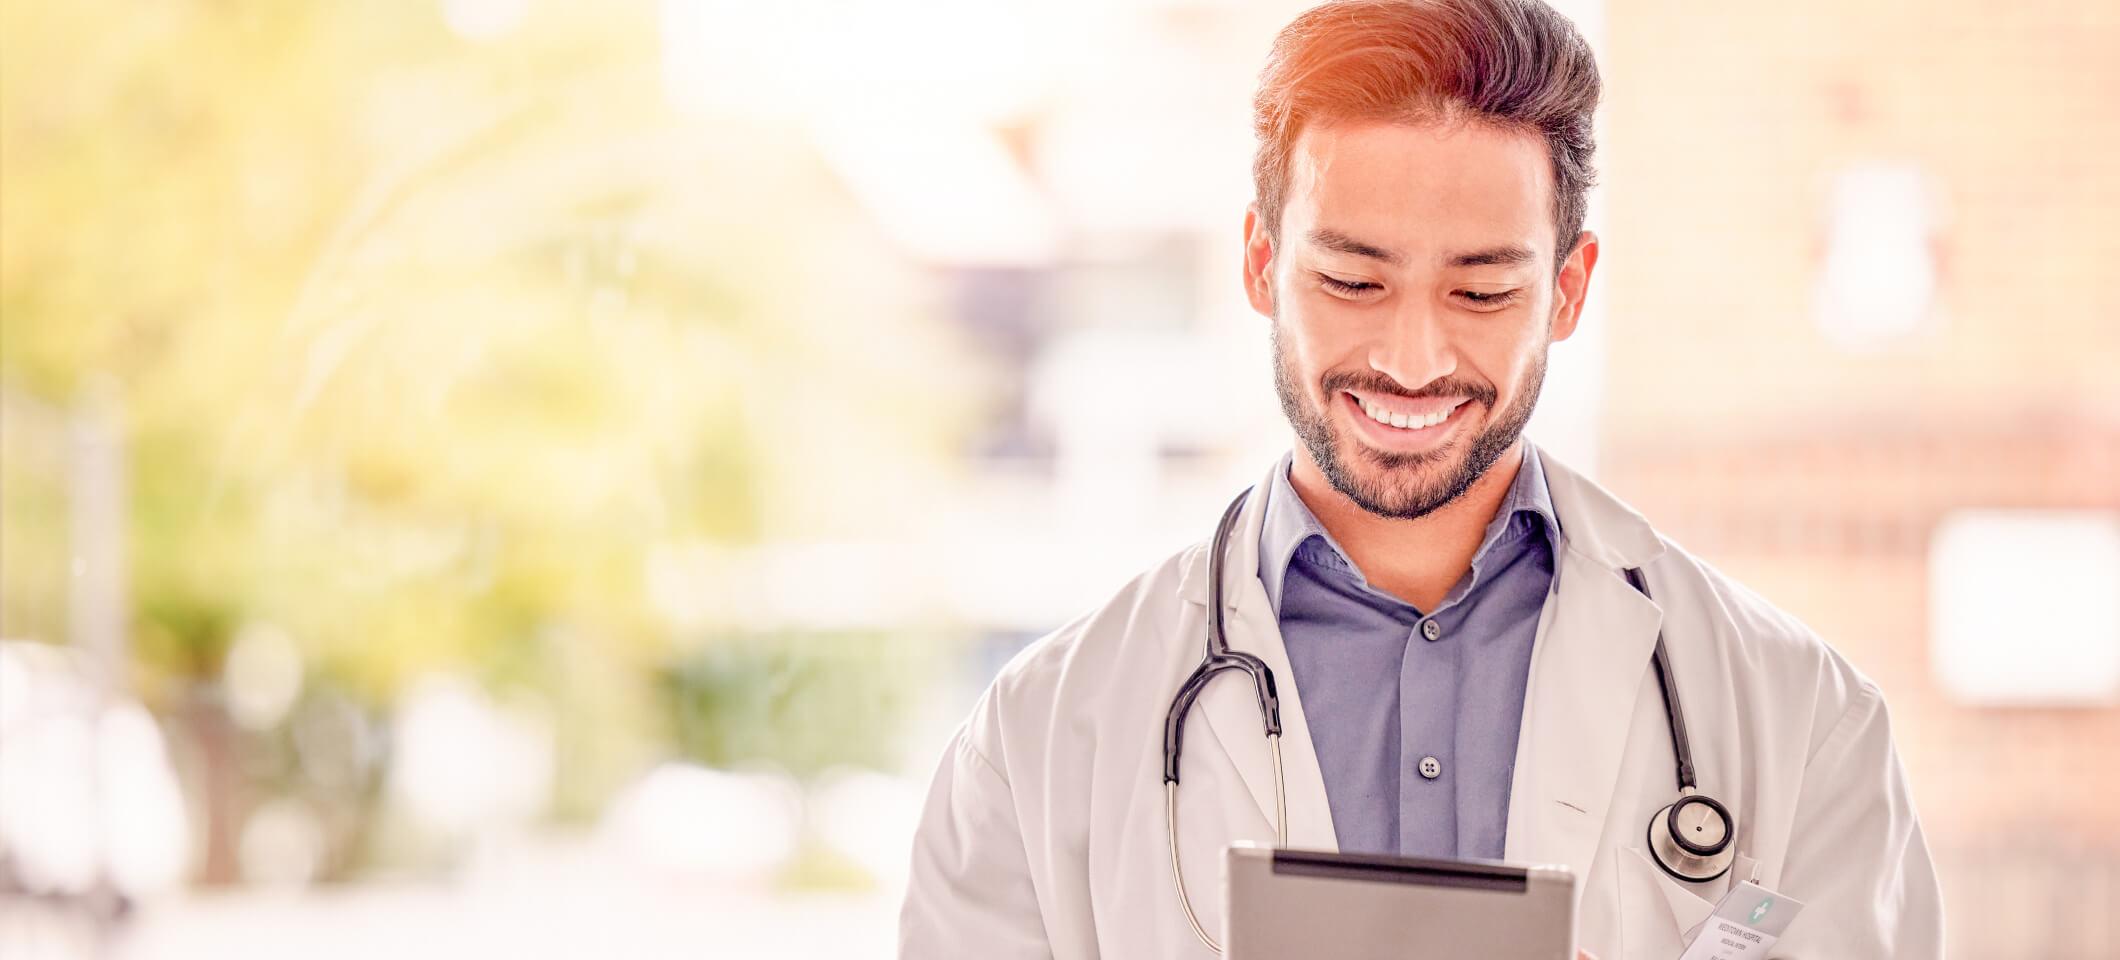 Physician looking at tablet learning about Google My Business for doctors